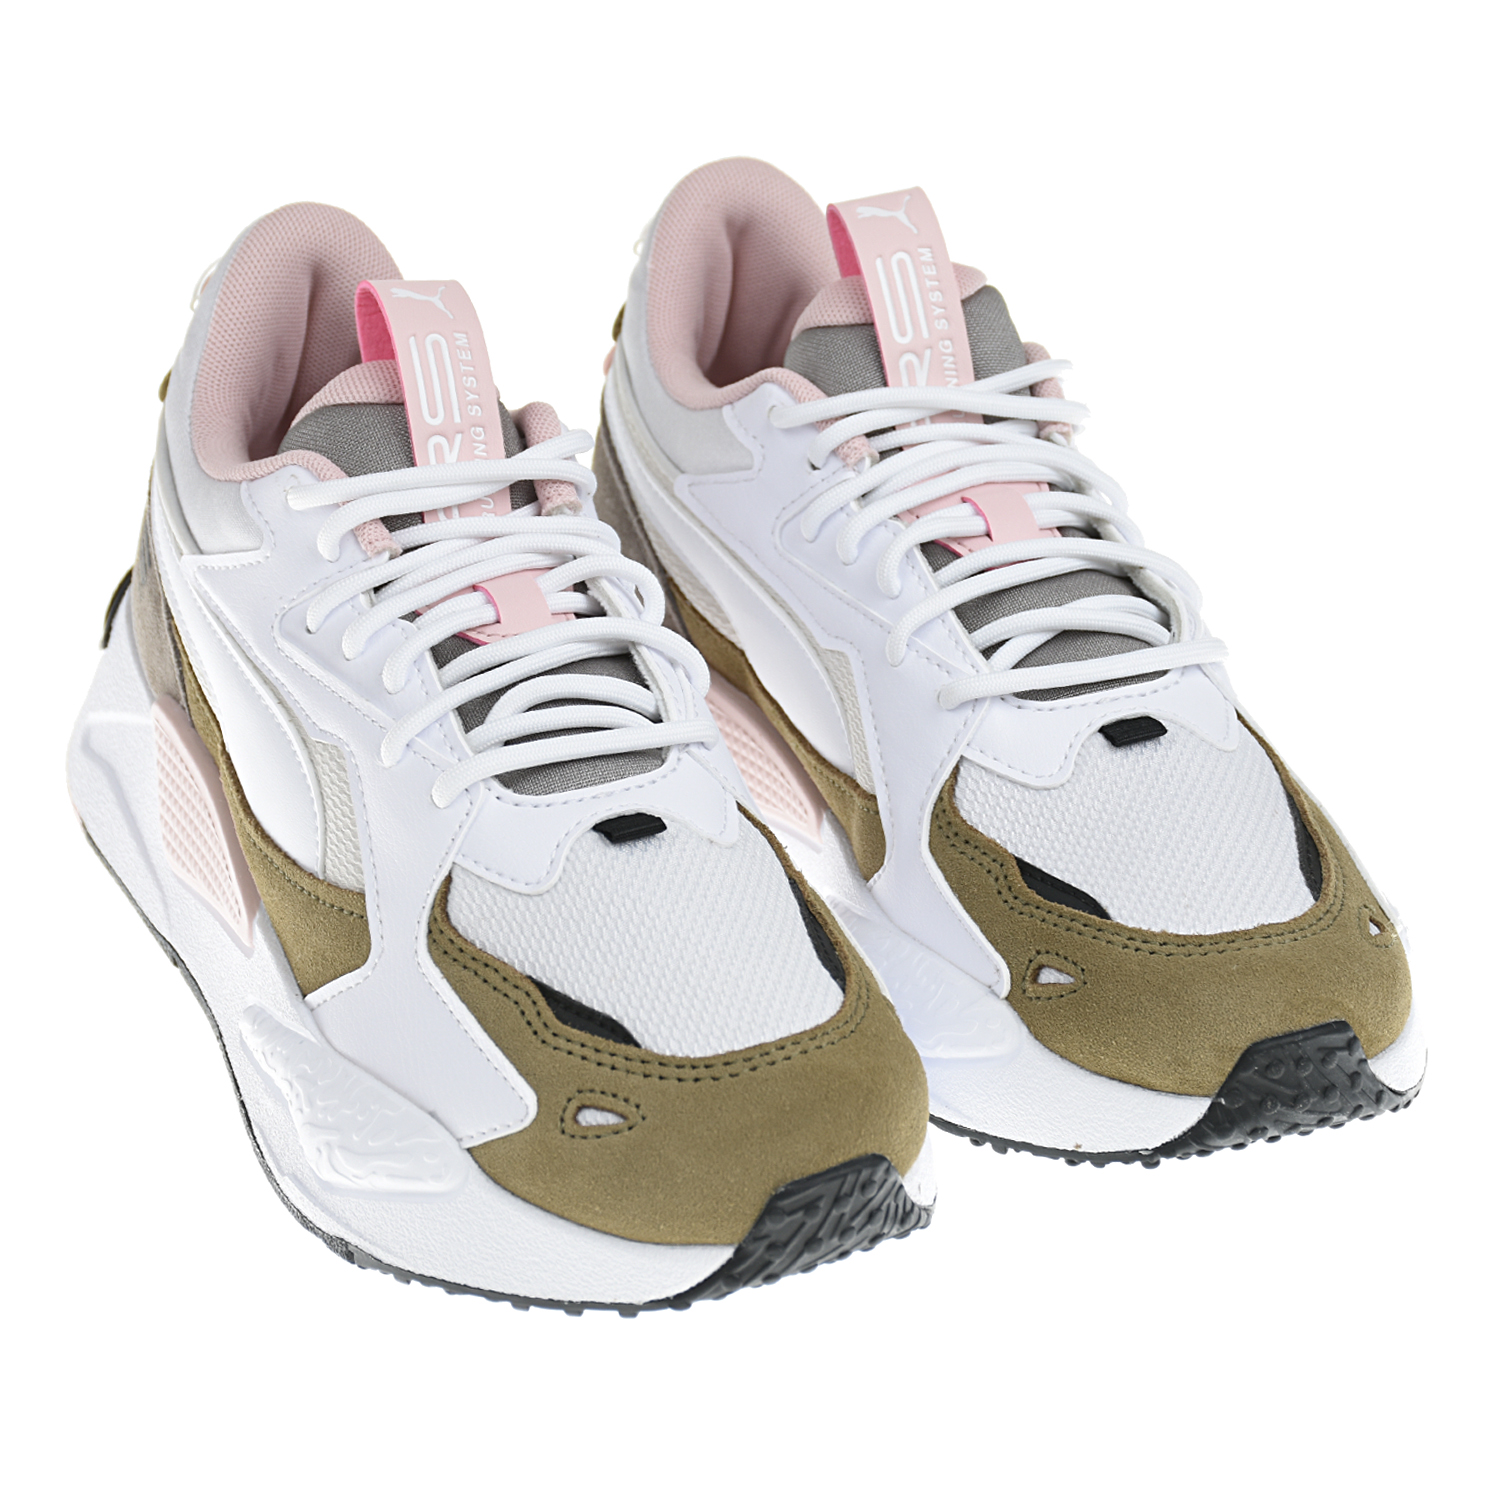 Кроссовки rs z. Puma RS-Z reinvent WNS. Кроссовки Puma RS-Z reinvent WNS. Женские кроссовки Puma RS-Z reinvent. Кроссовки Puma RS-Z reinvent women's Trainers.